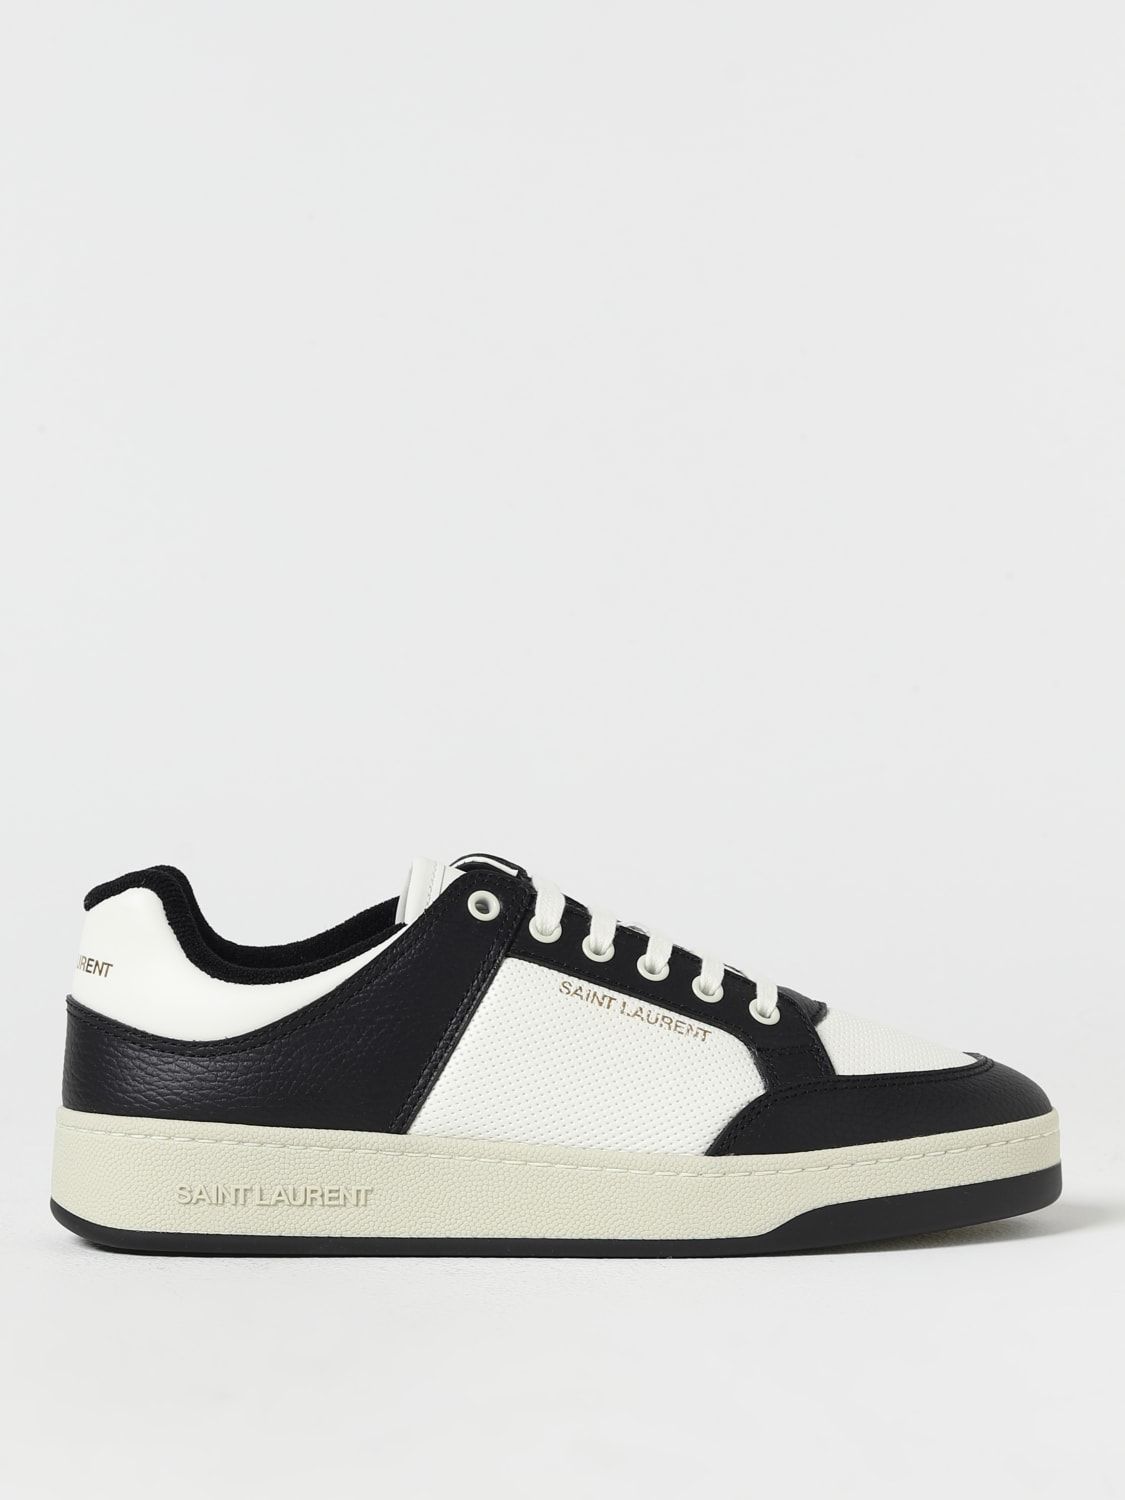 SAINT LAURENT: sneakers in grained leather - White | Saint Laurent sneakers 713600AAAWR online at... | Giglio.com - Global Italian fashion boutique